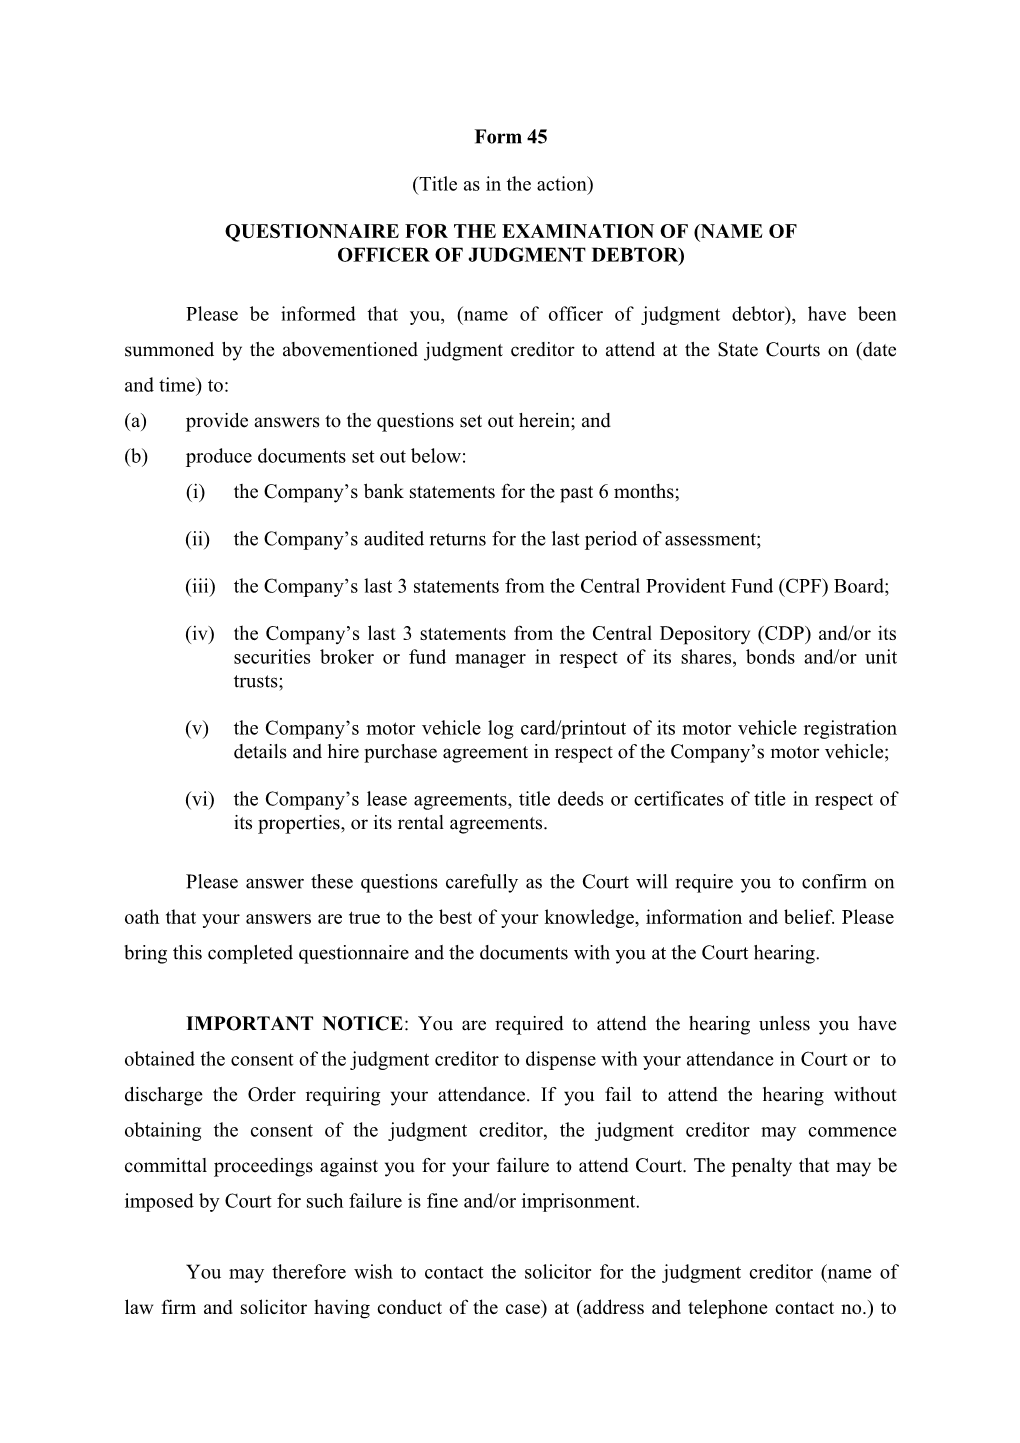 Questionnaire for the Examination of (Name of Officer of Judgment Debtor)